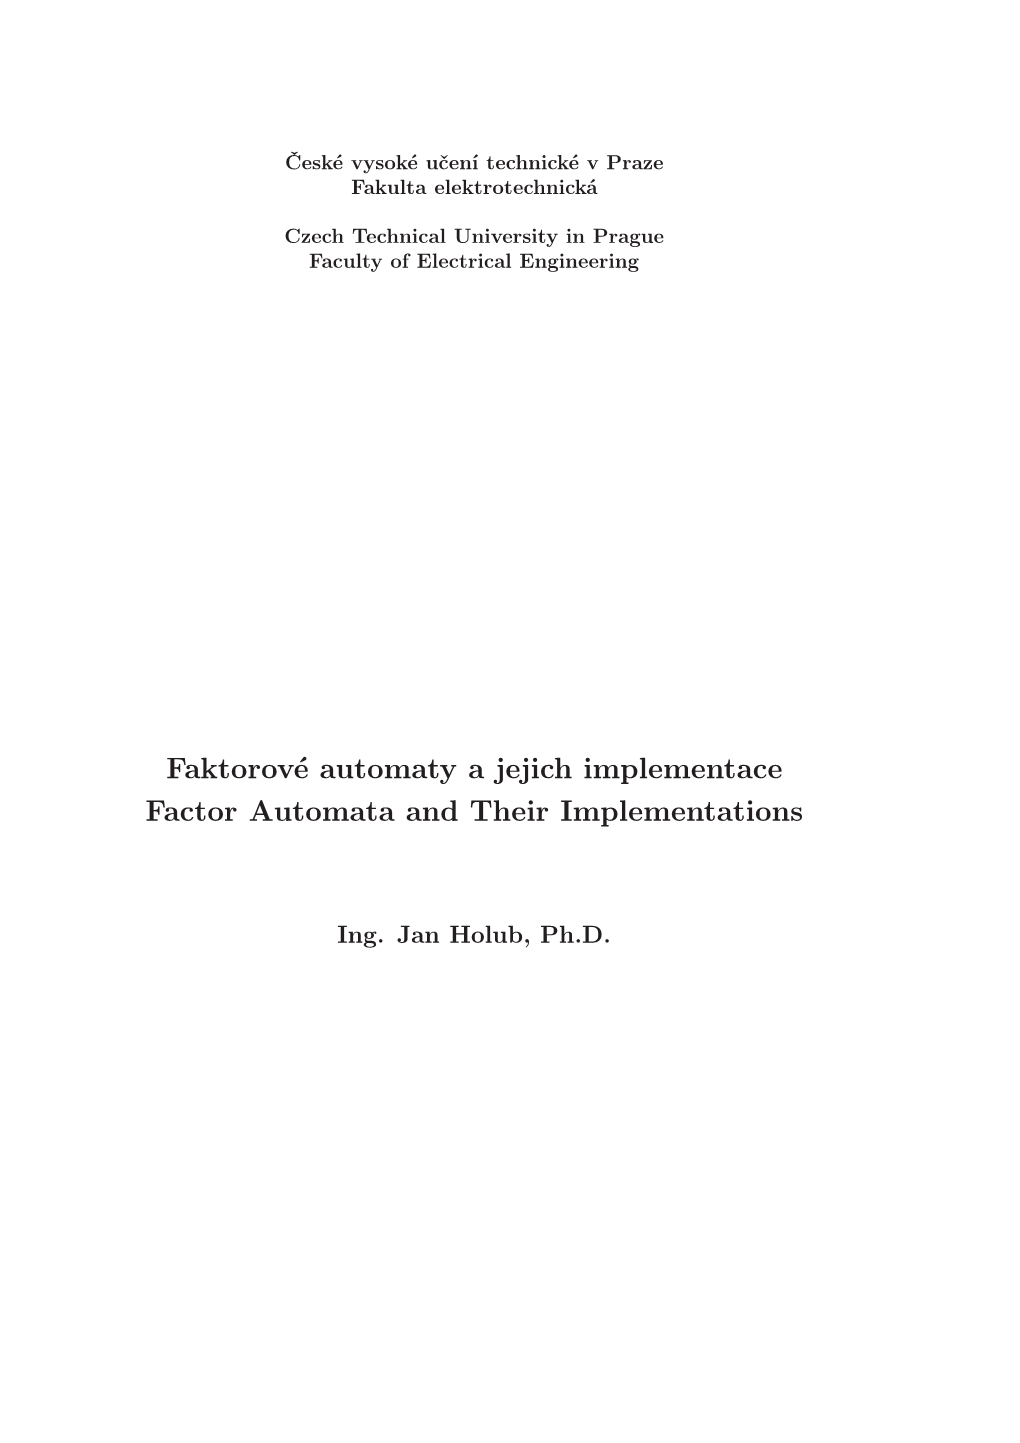 Factor Automata and Their Implementations